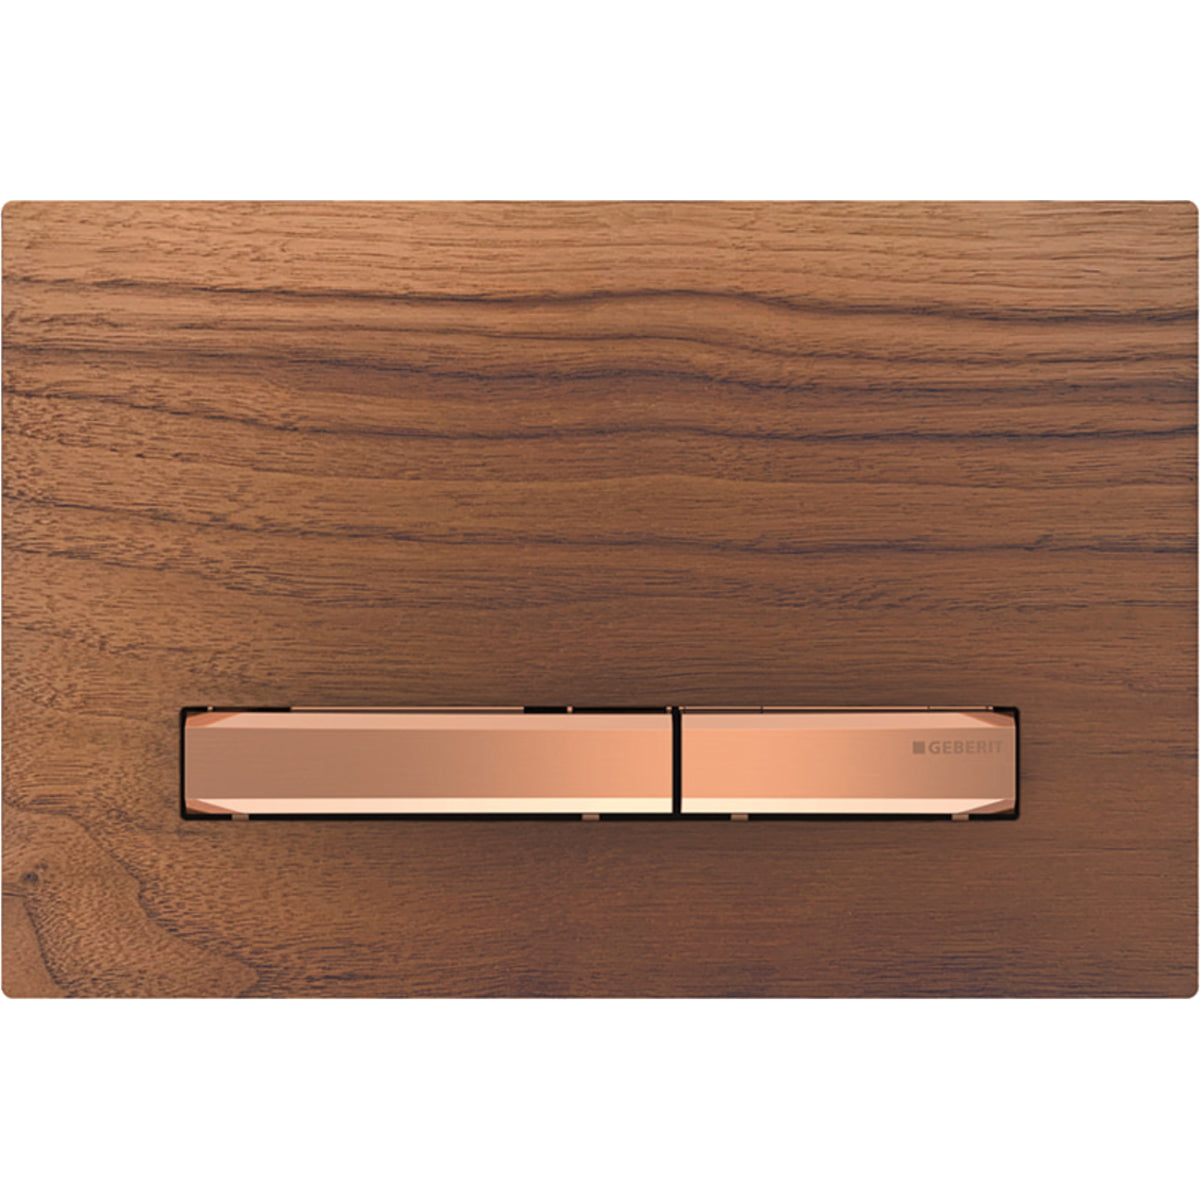 Geberit 115.670.JX.2- Geberit actuator plate Sigma50 for dual flush, metal colour red gold: red gold, black walnut - FaucetExpress.ca